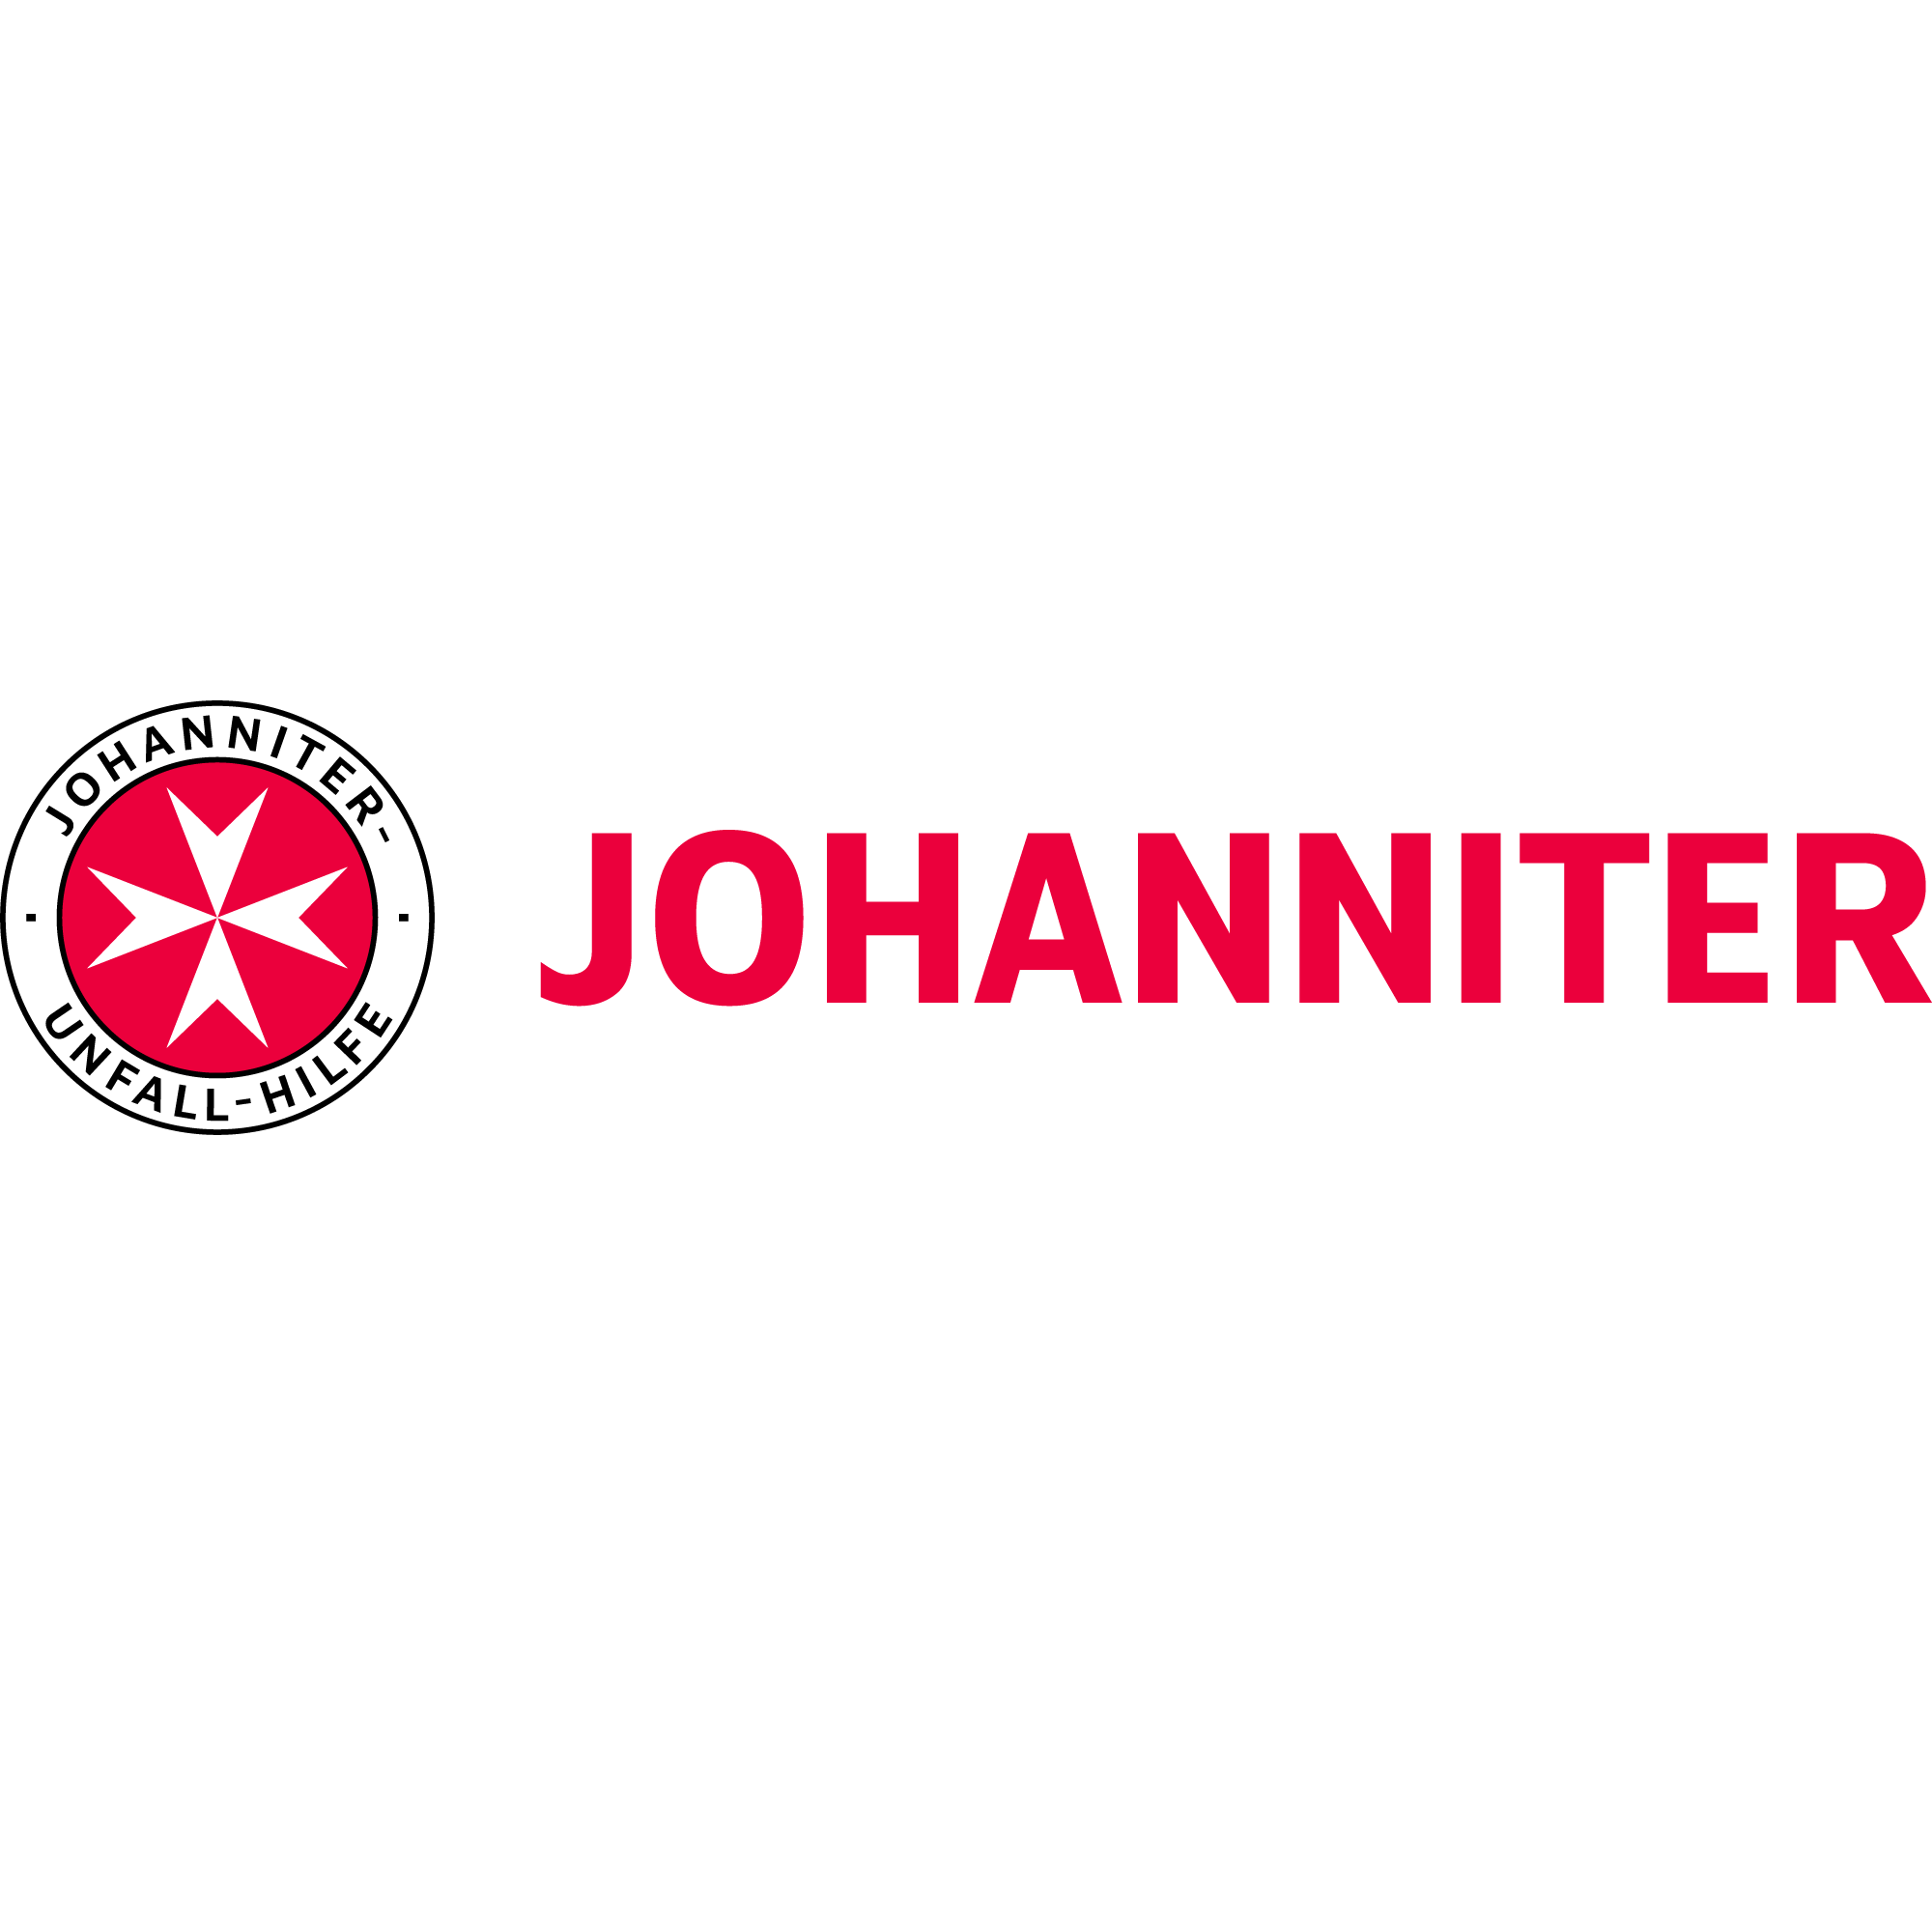 Logo von Johanniter-Unfall-Hilfe e.V. - Competence Center European Civil Protection and Disaster Assistance (EUCC)